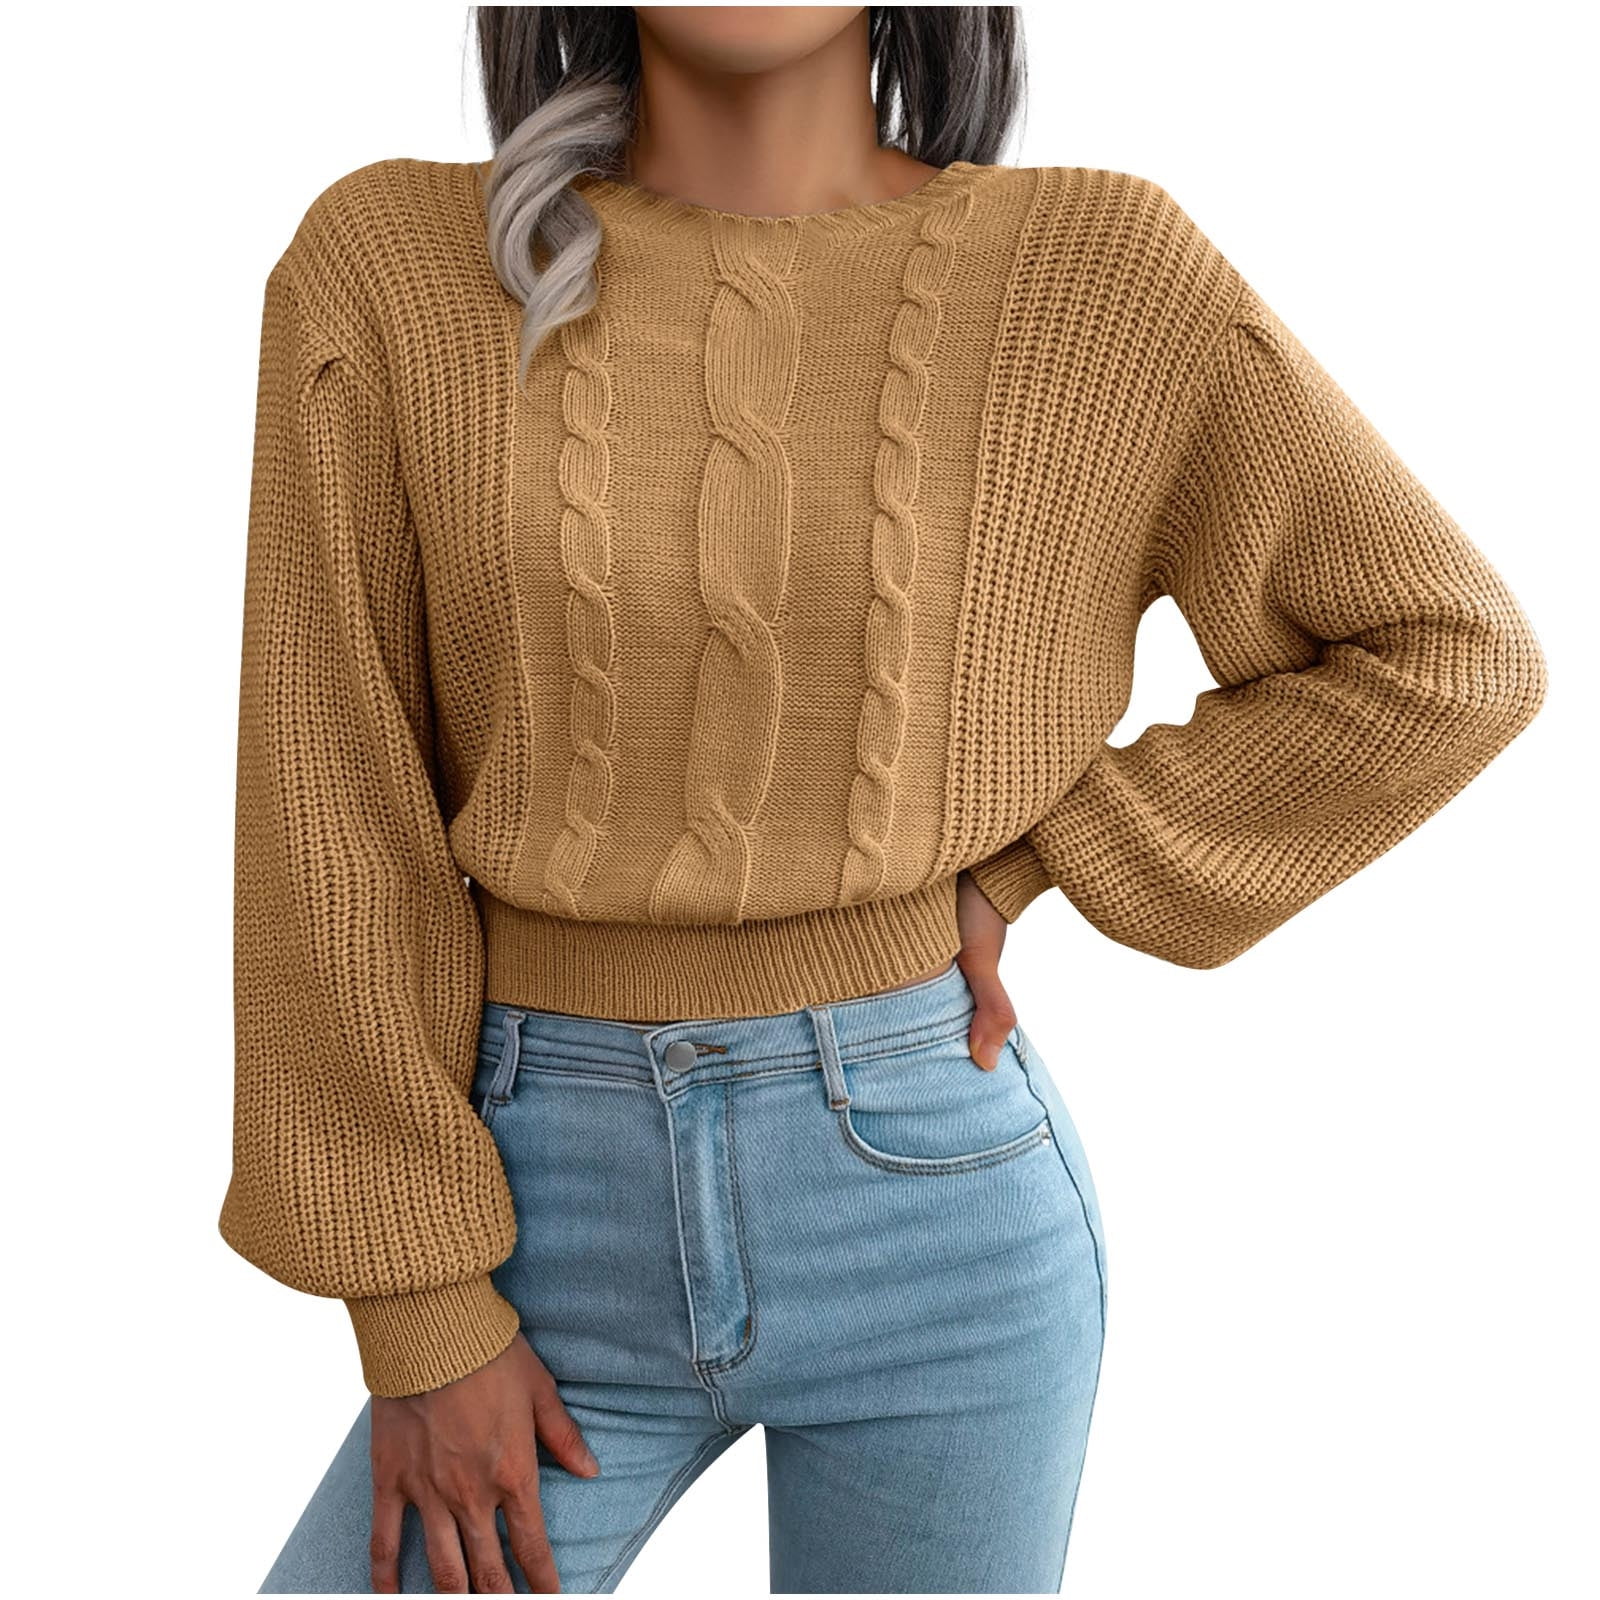 HTNBO Cute Cropped Sweaters for Juniors Casual Fall Chunky Printed